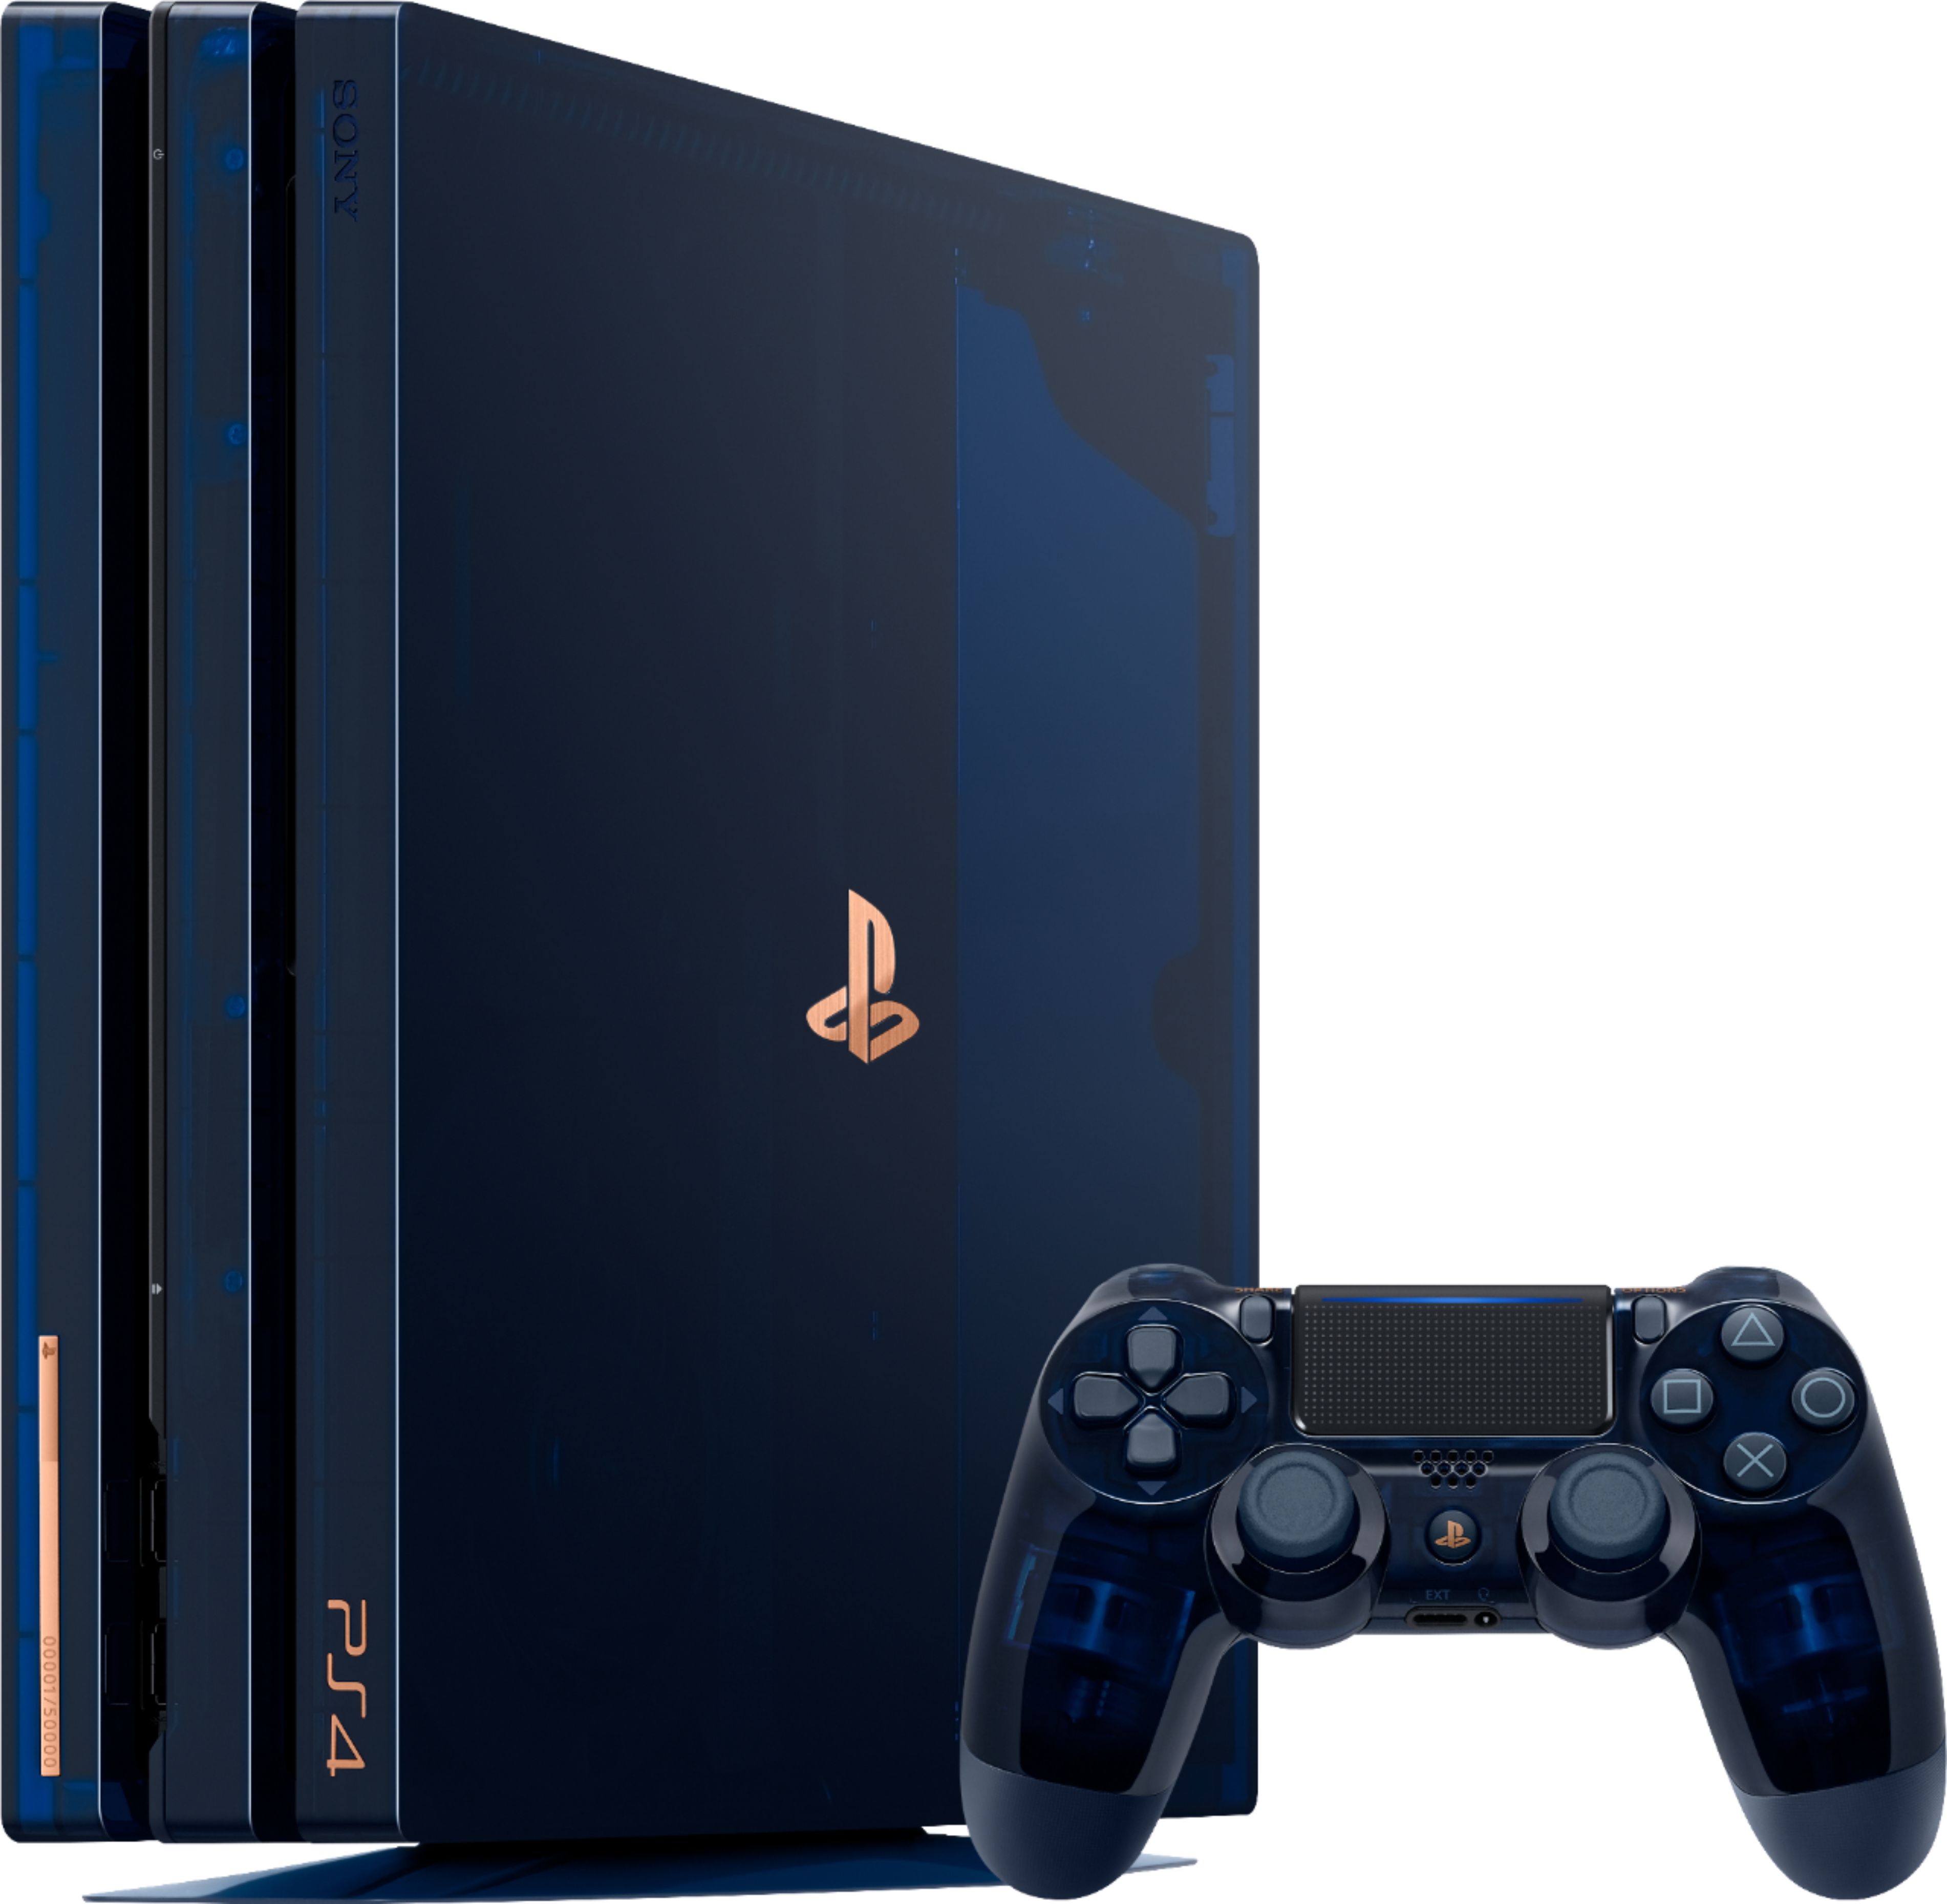 ps4 one million edition